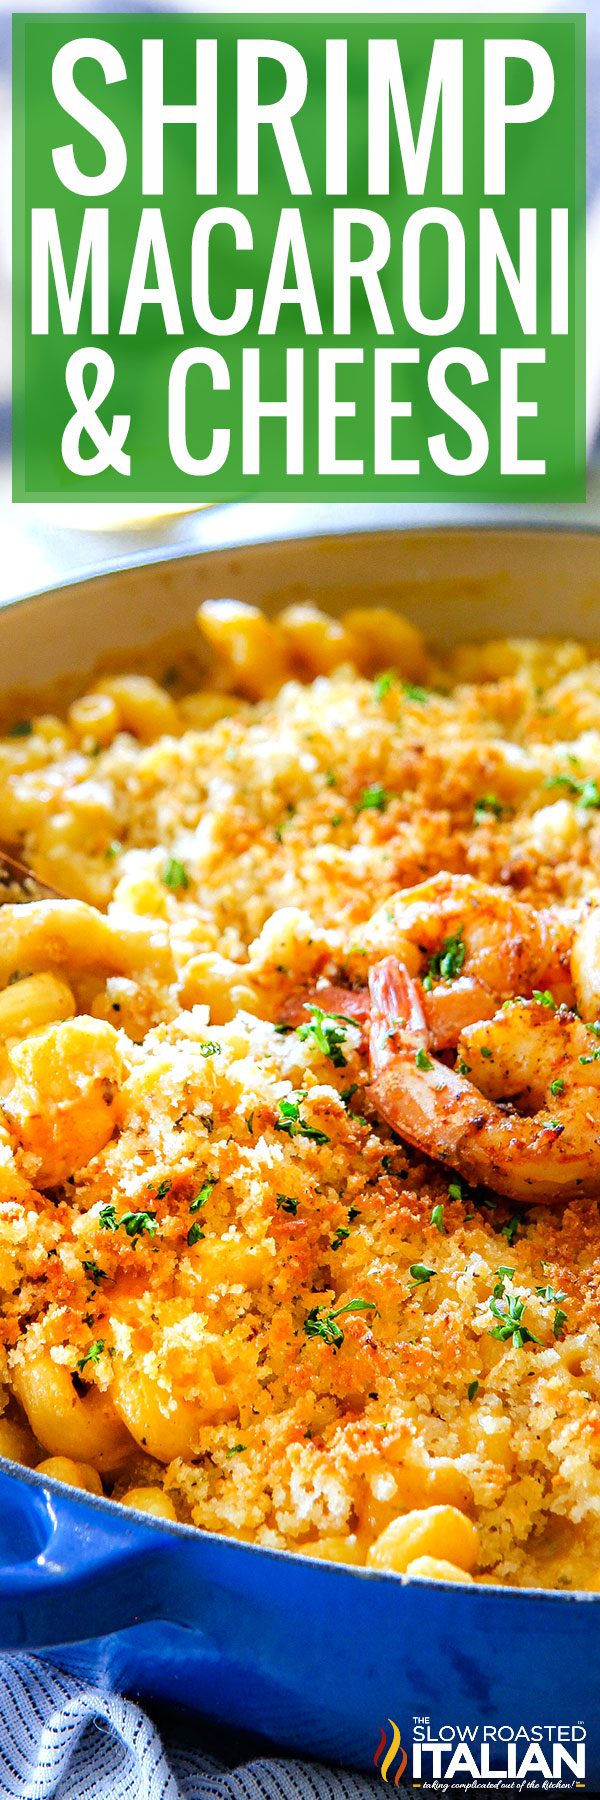 shrimp macaroni and cheese in a blue baking dish.